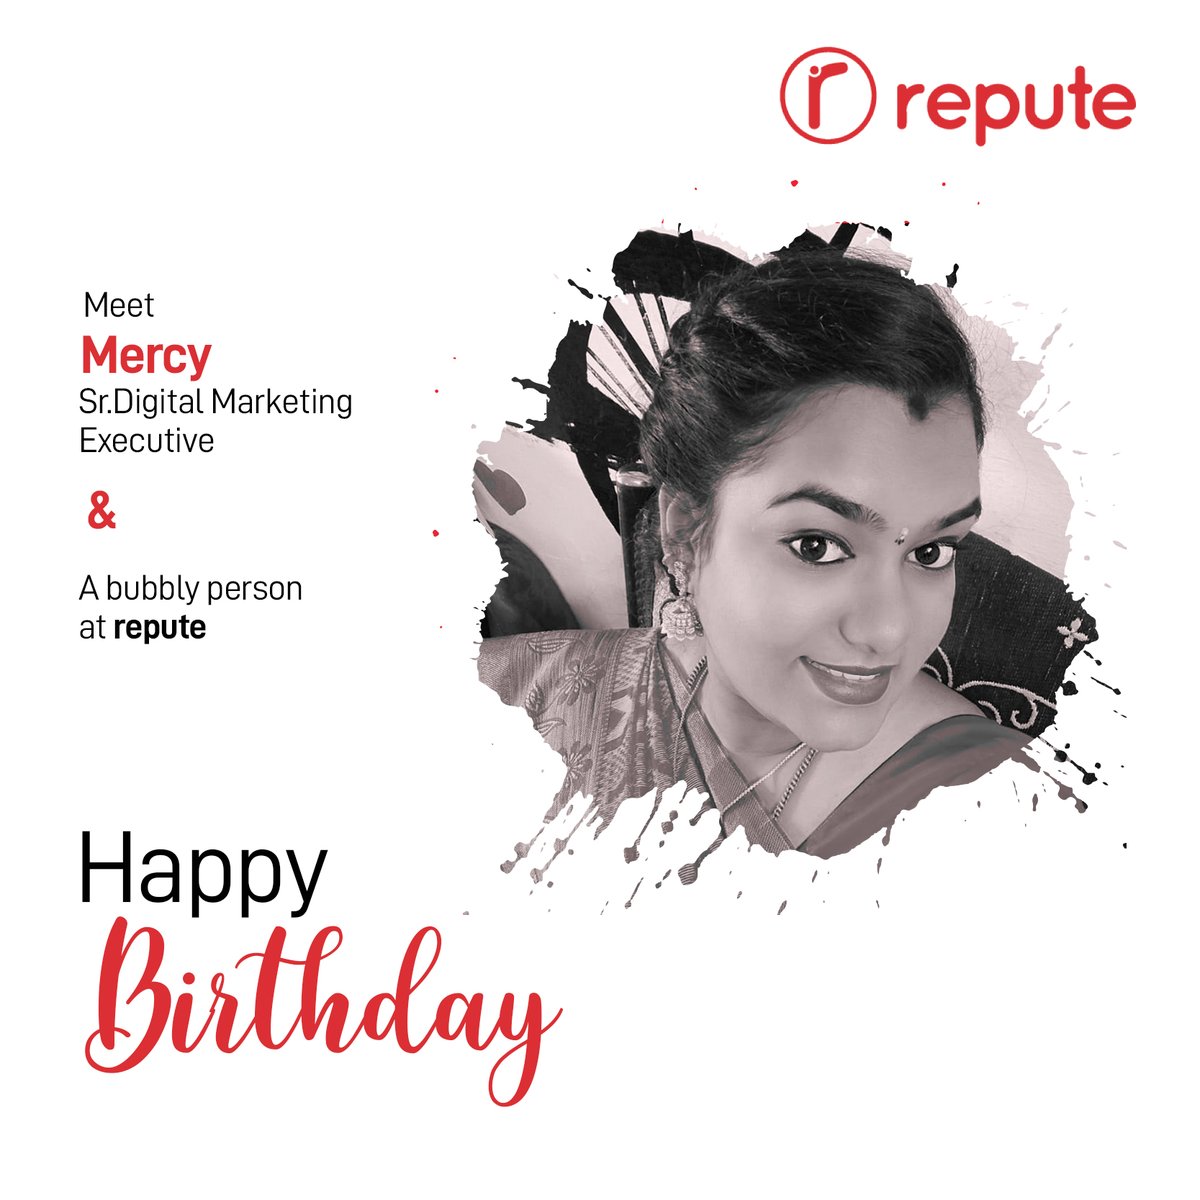 Happy Birthday Mercy! 💐💐

Roseline Mercy M is our Senior Digital Marketing Executive . A hard worker and a delightful person to work with, we wish her all the best for all her ventures in future!

#birthdayparty #birthdaycake #ReputeAgency #DigitalMarketingExecutive